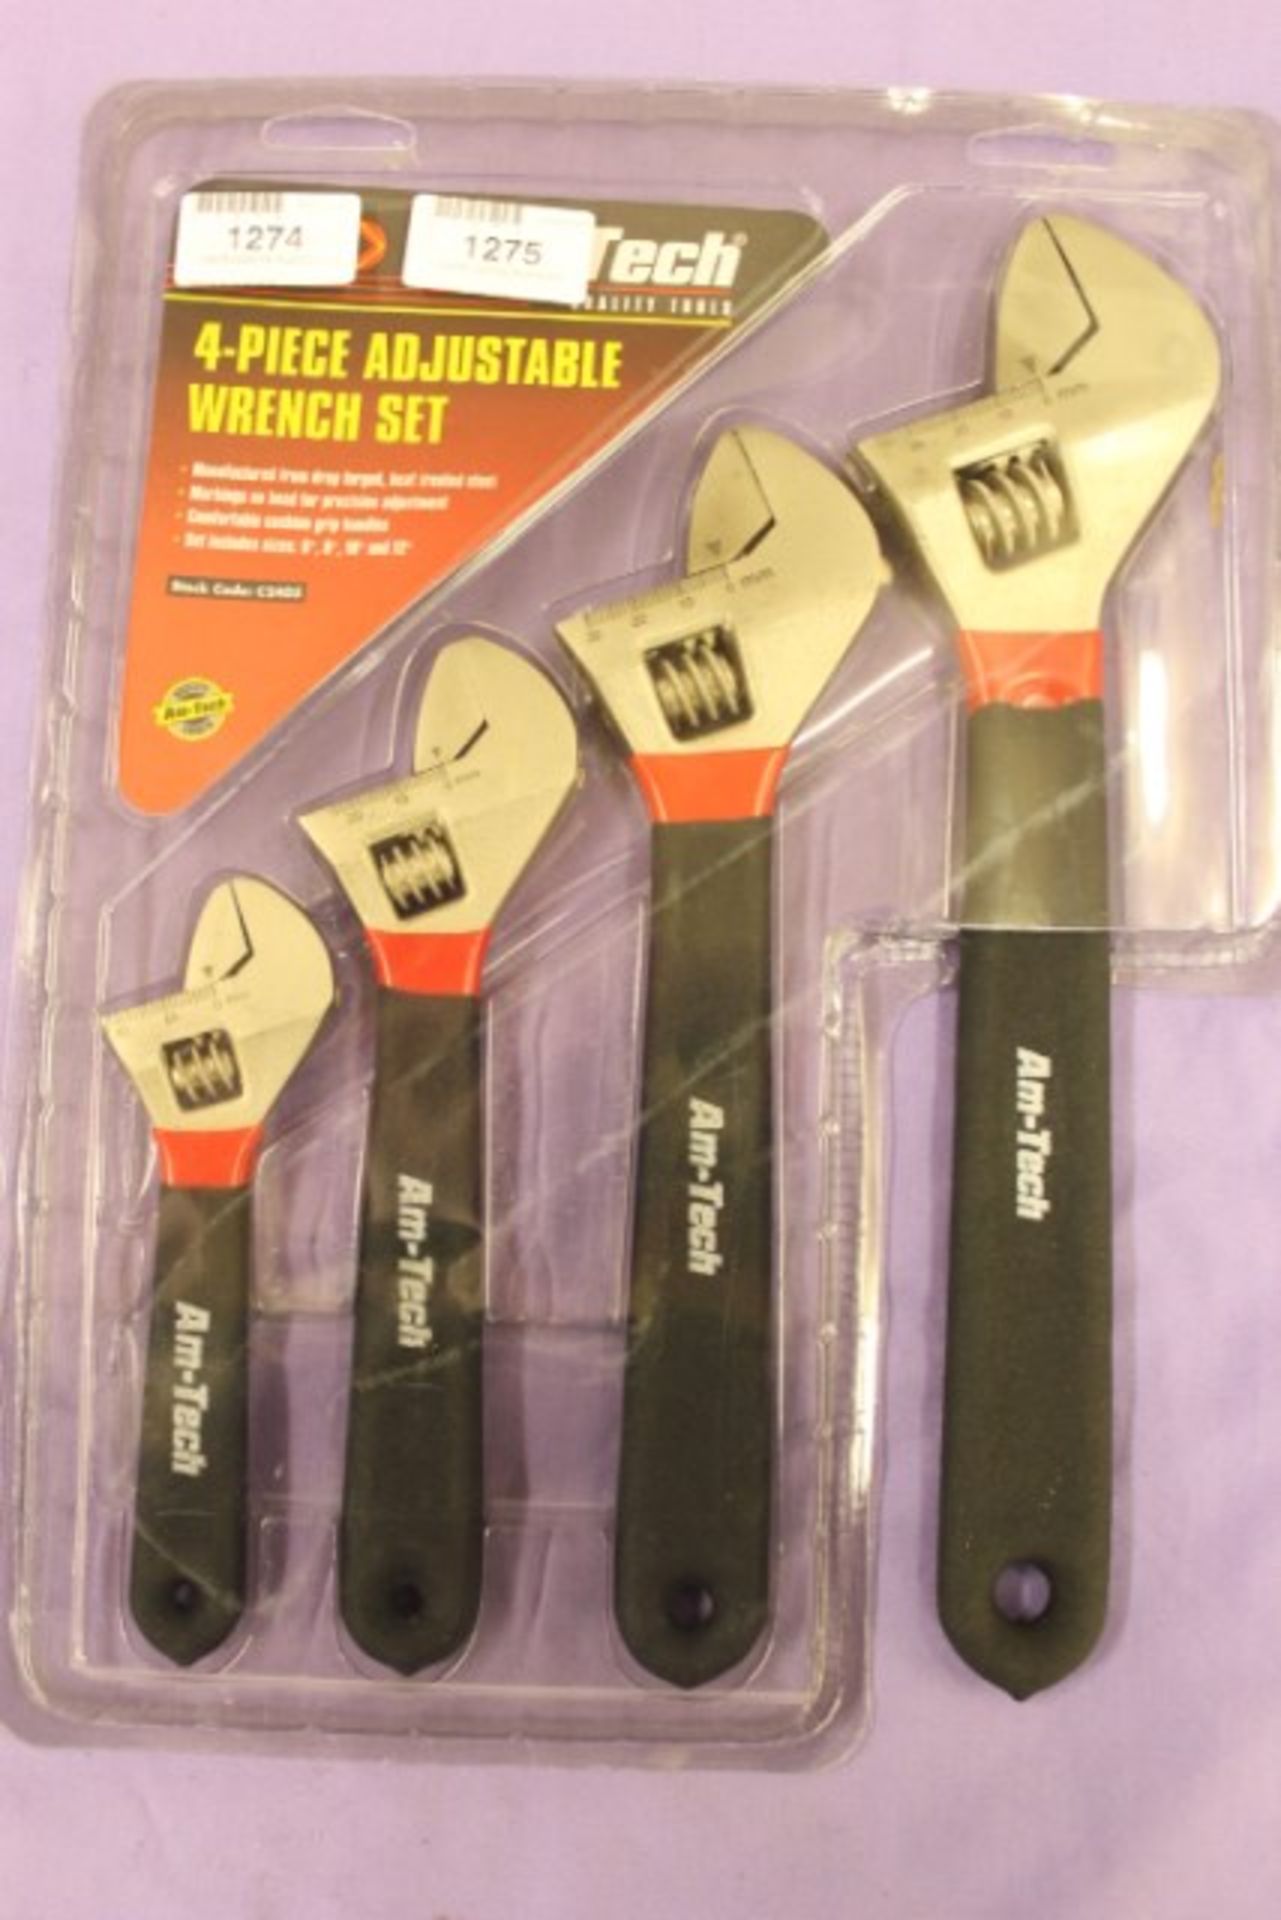 V *TRADE QTY* Brand New Large Four Piece Adjustable Spanner Set Up To 12 Inch X 10 YOUR BID PRICE TO - Image 2 of 2